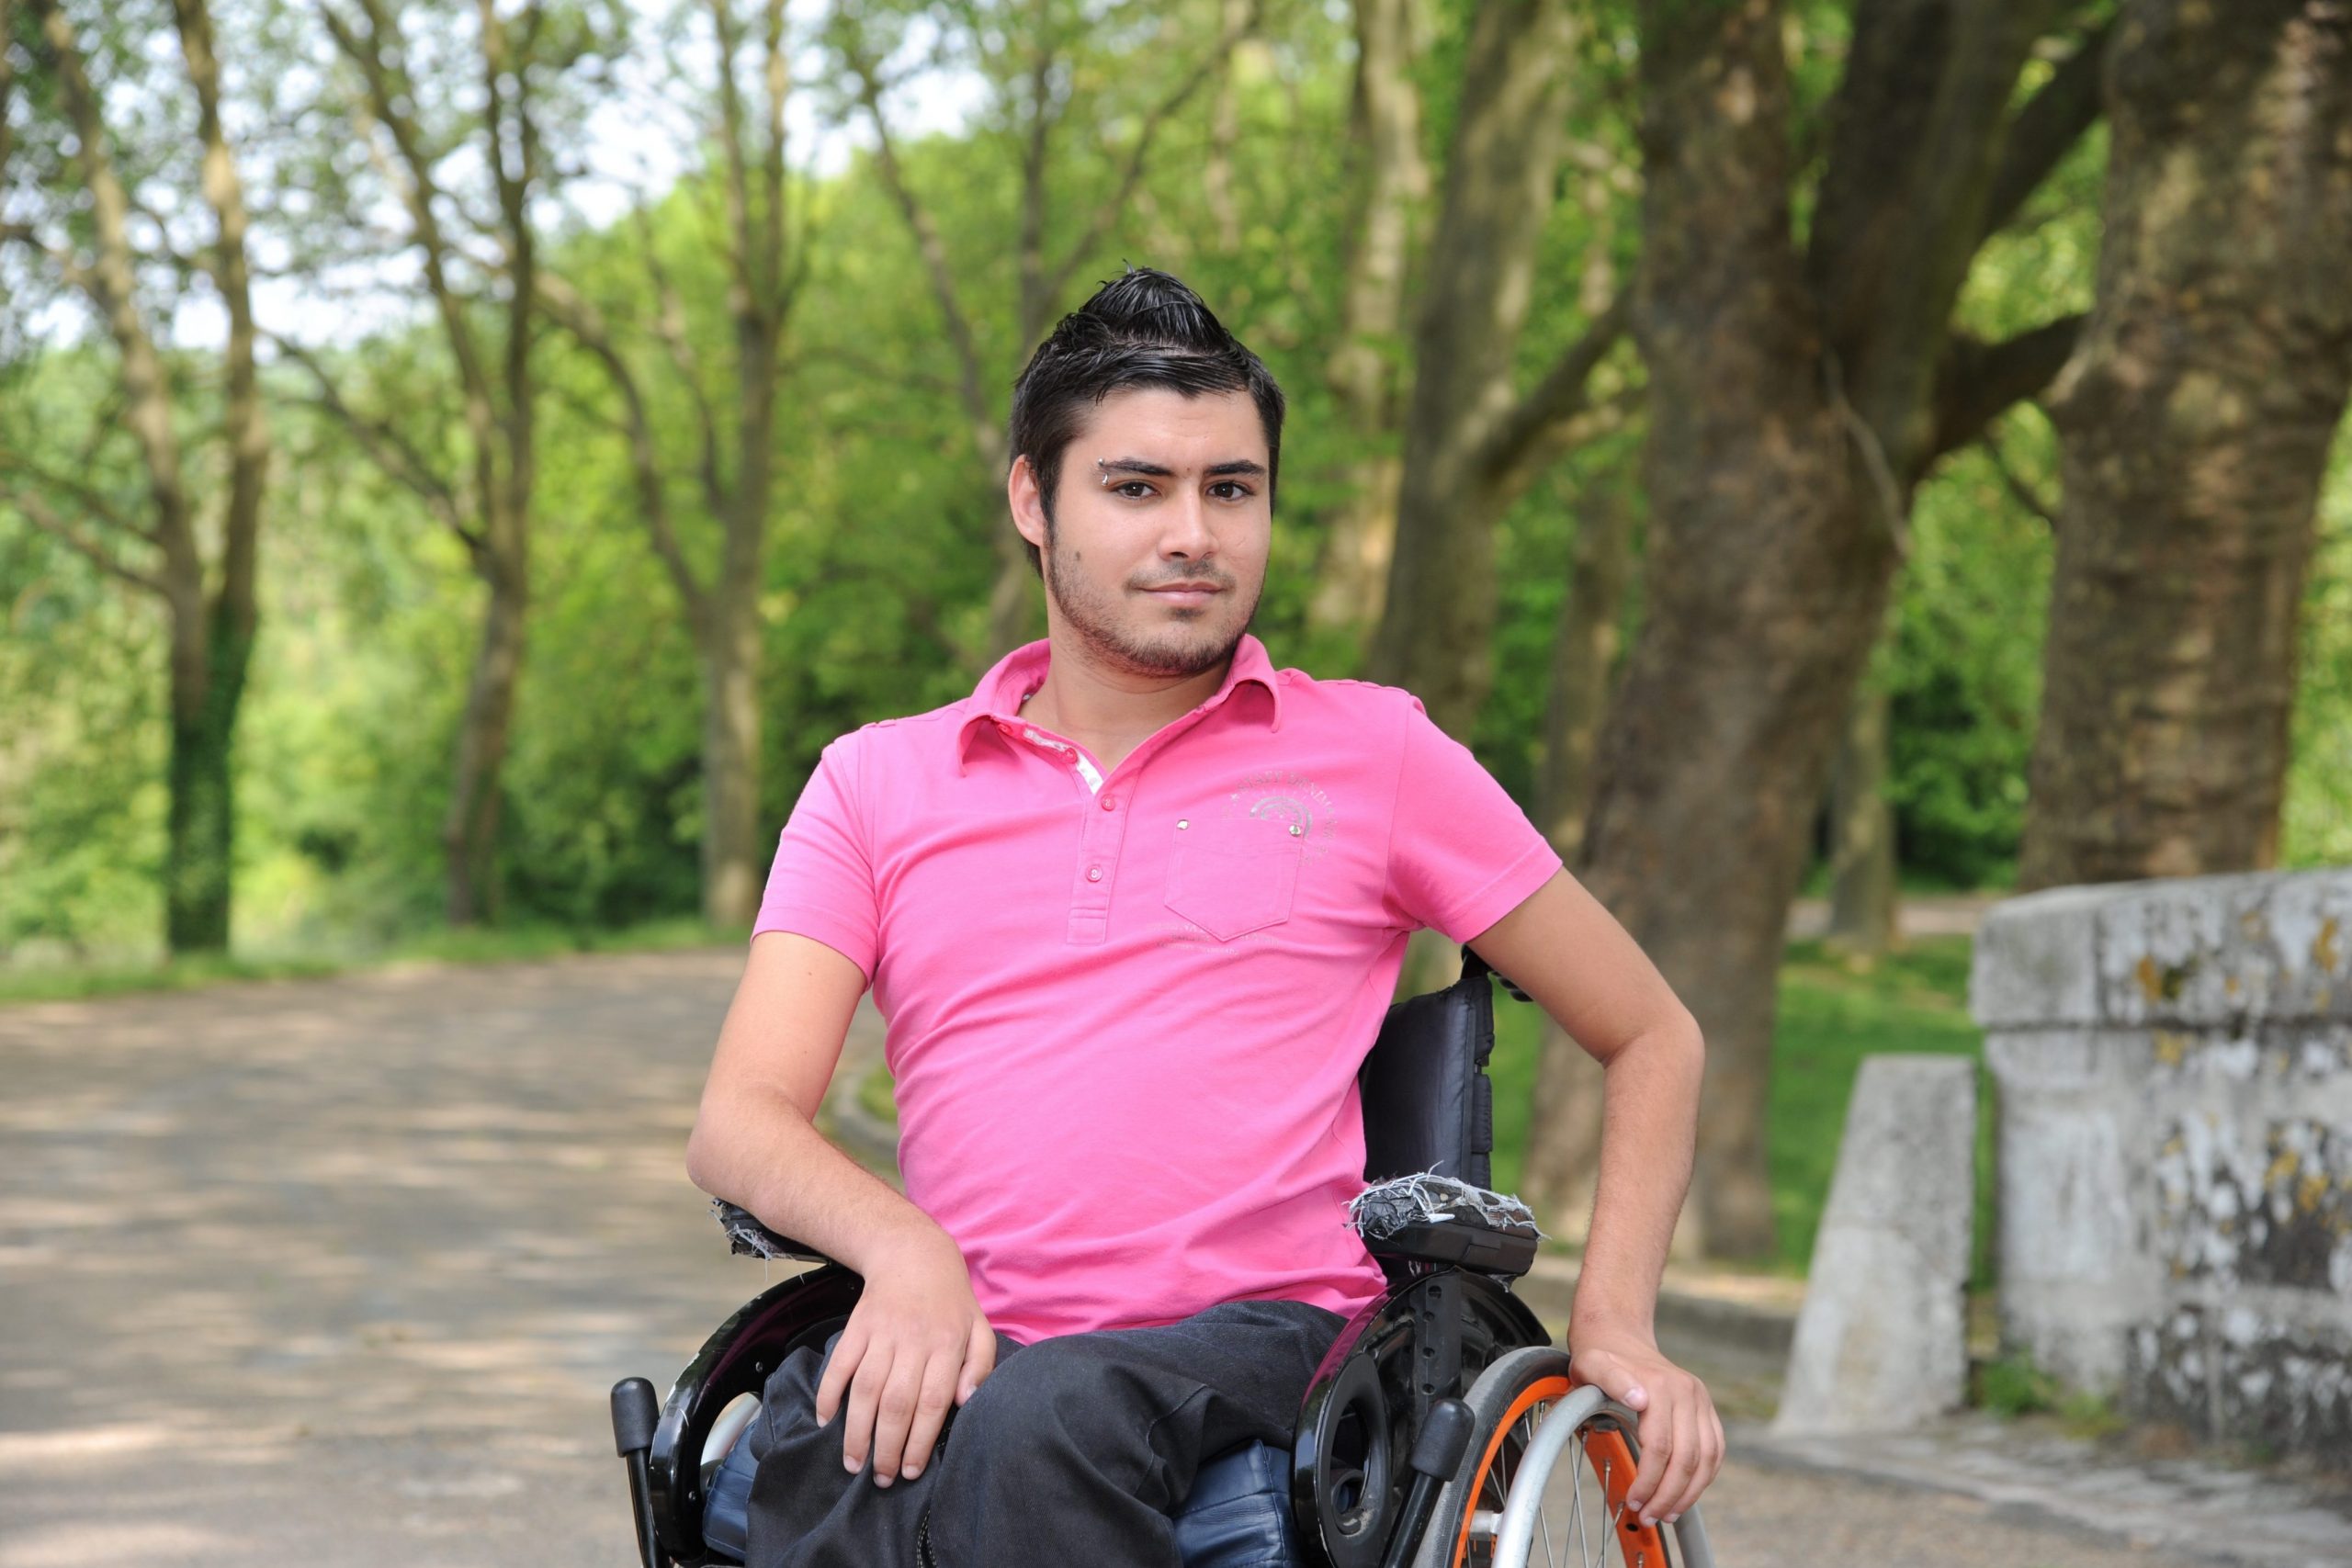 Young man in a wheelchair